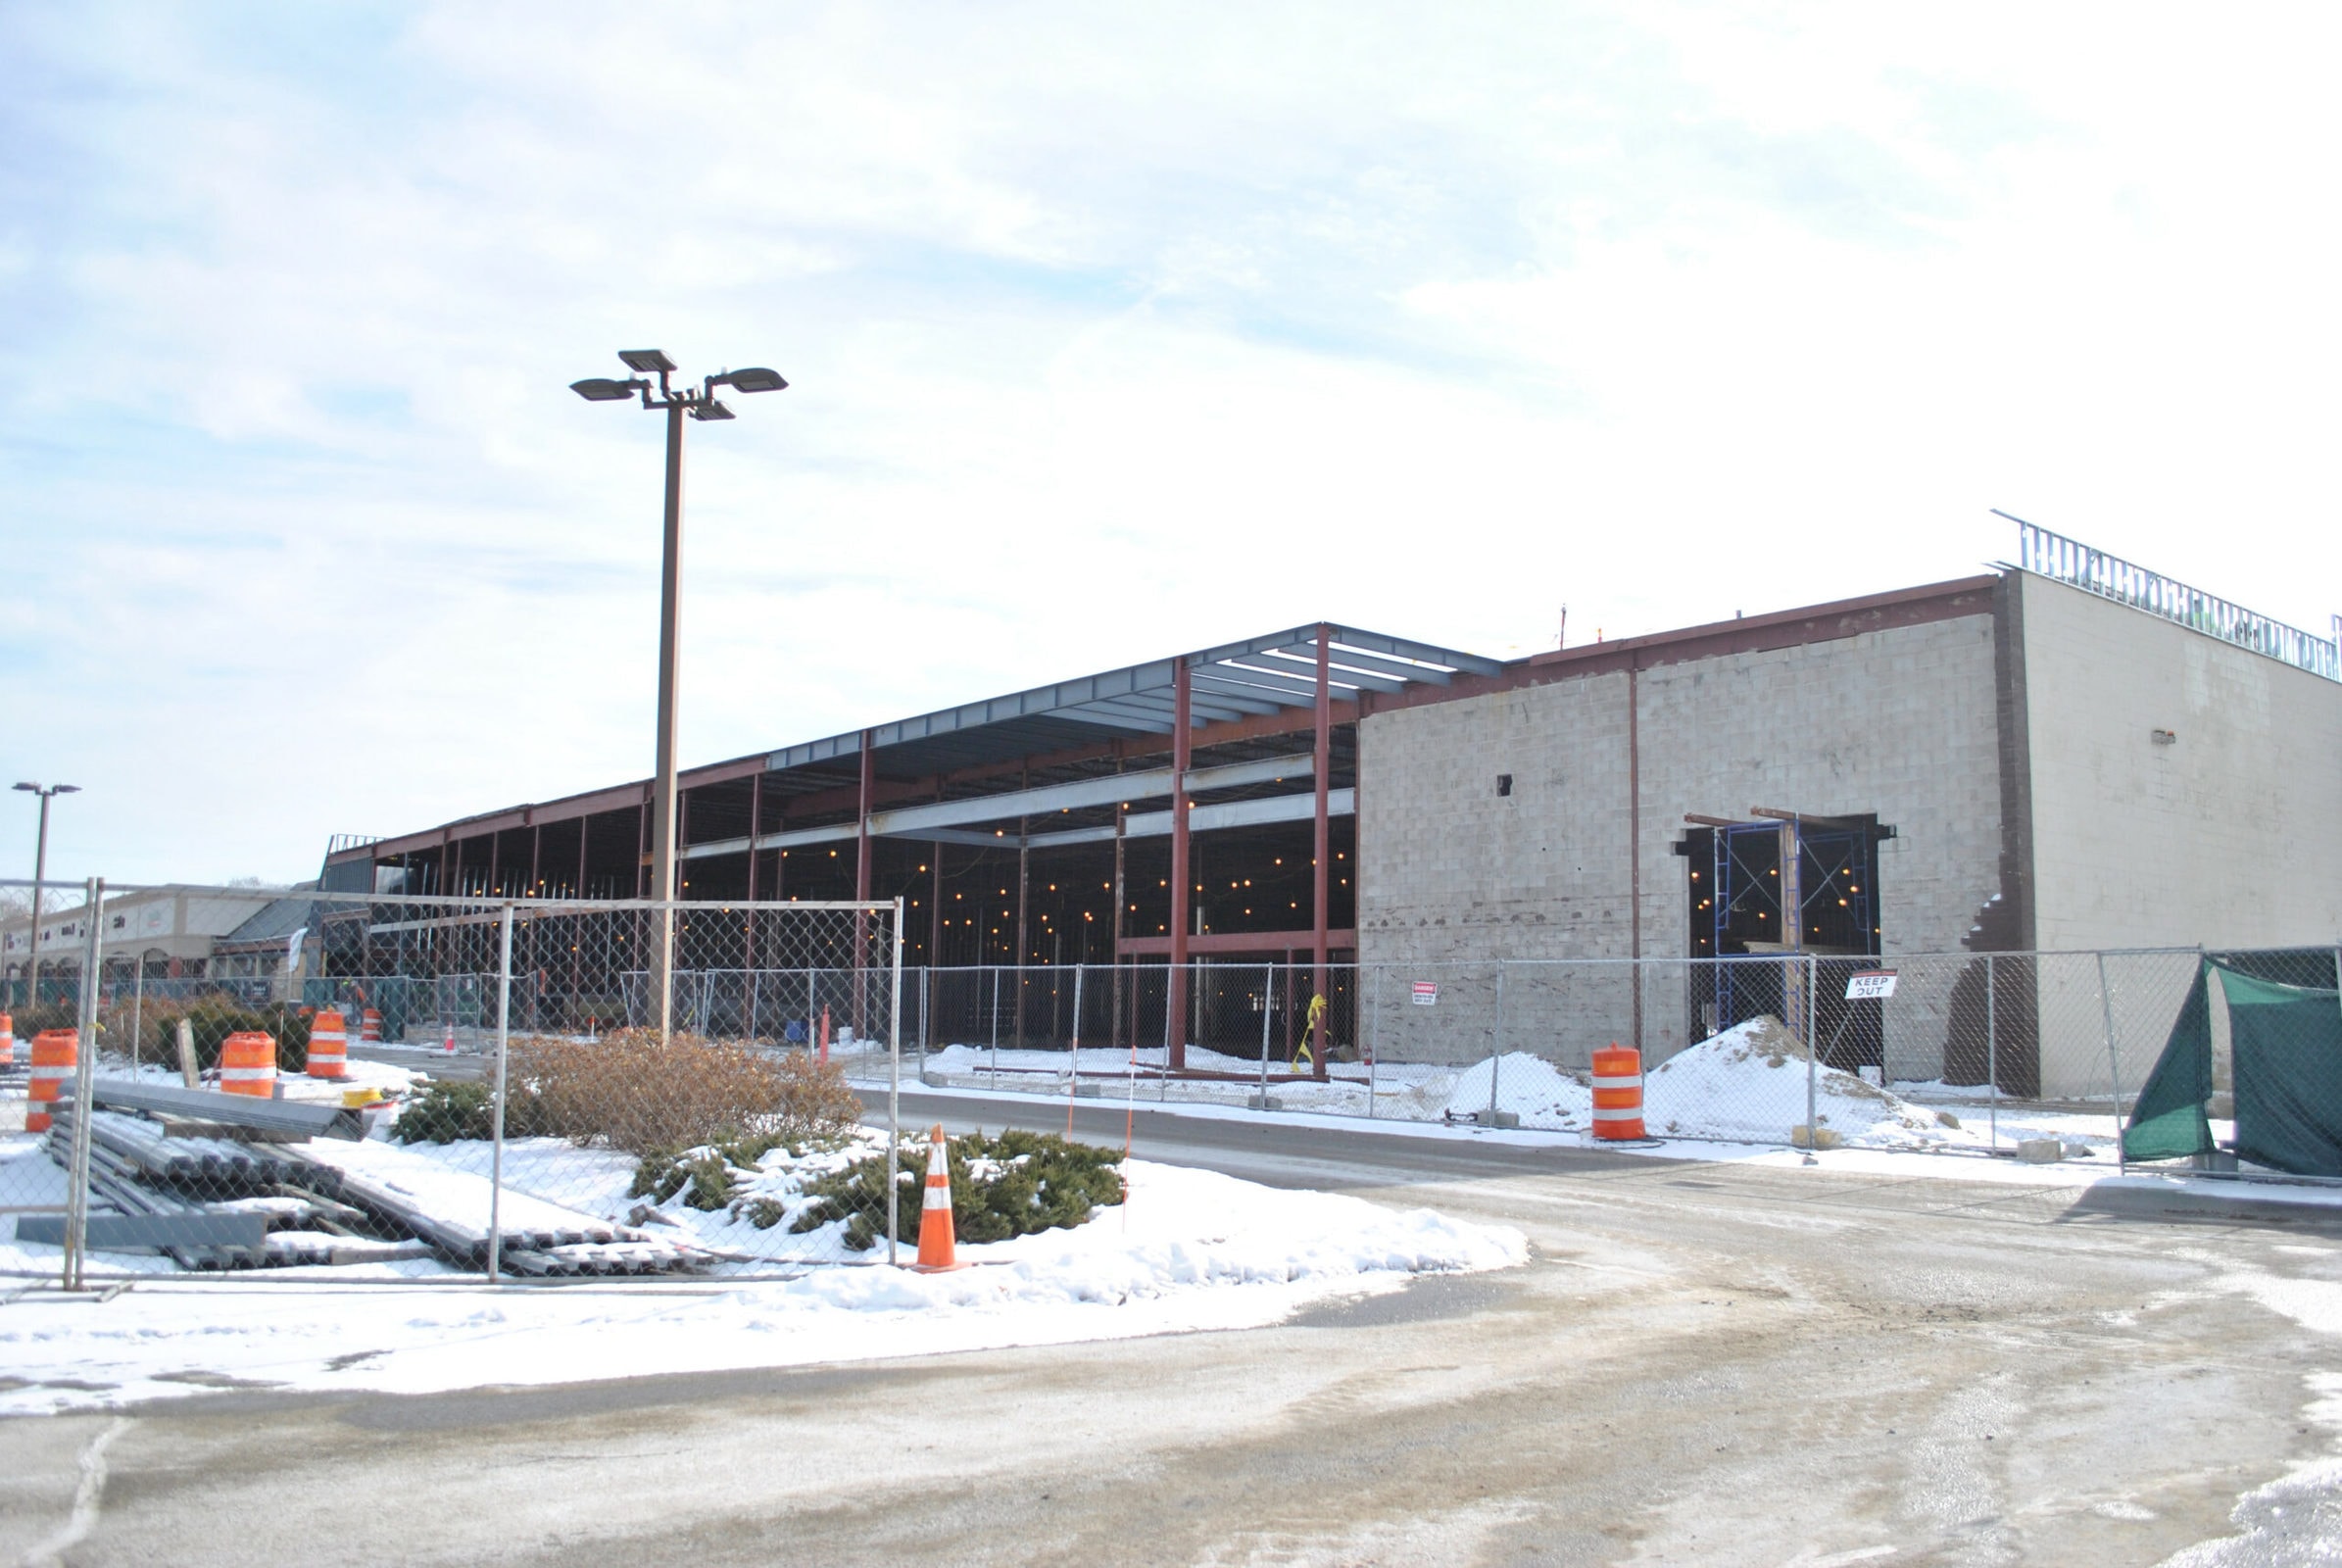 Ashley Homestore to occupy part of former Stop and Shop space in Westborough